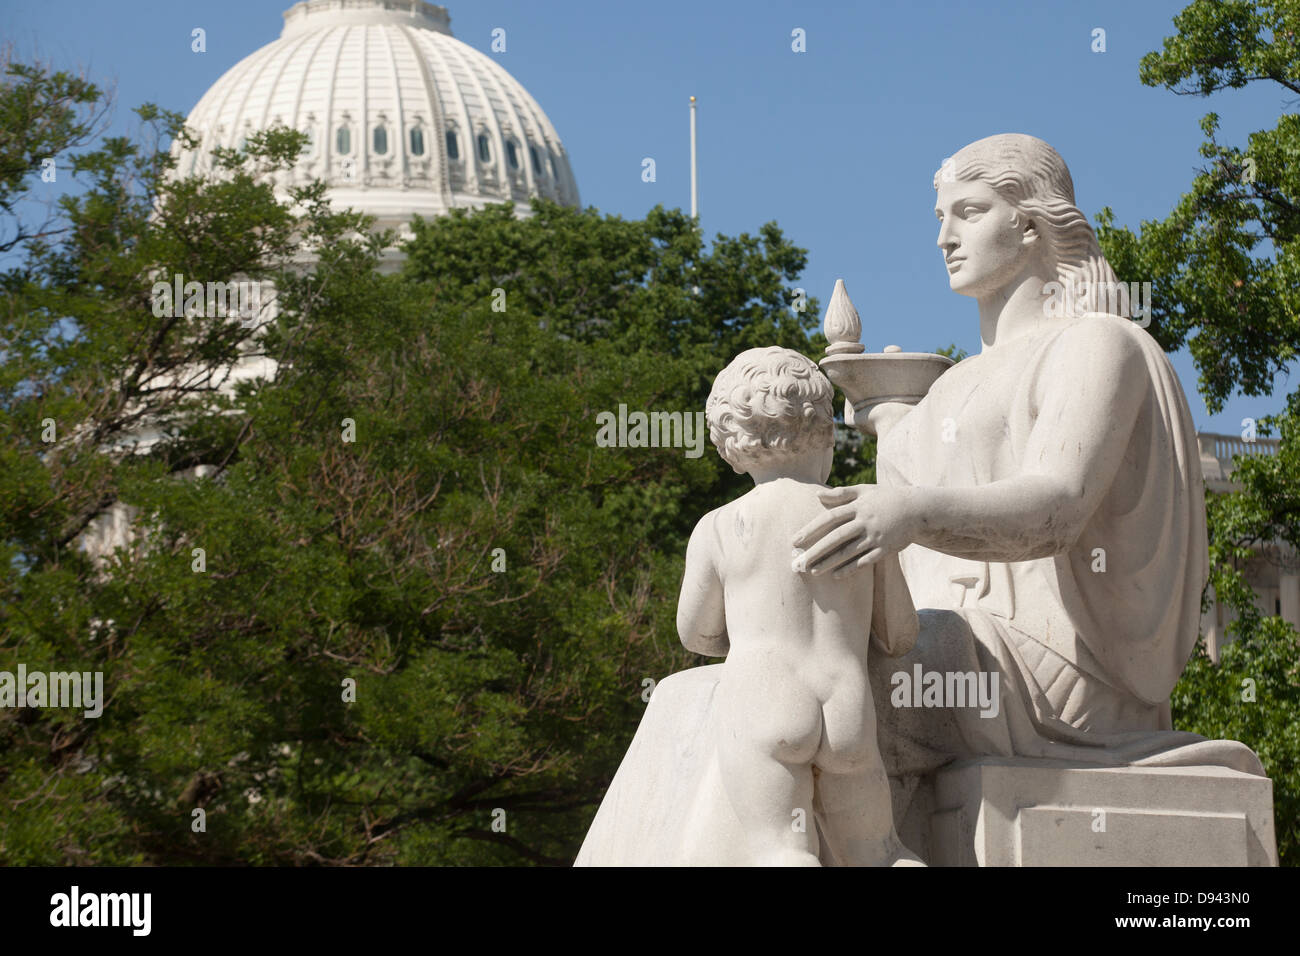 The Spirit of Justice sculpture at the Rayburn House of Representatives building, Washington DC Stock Photo